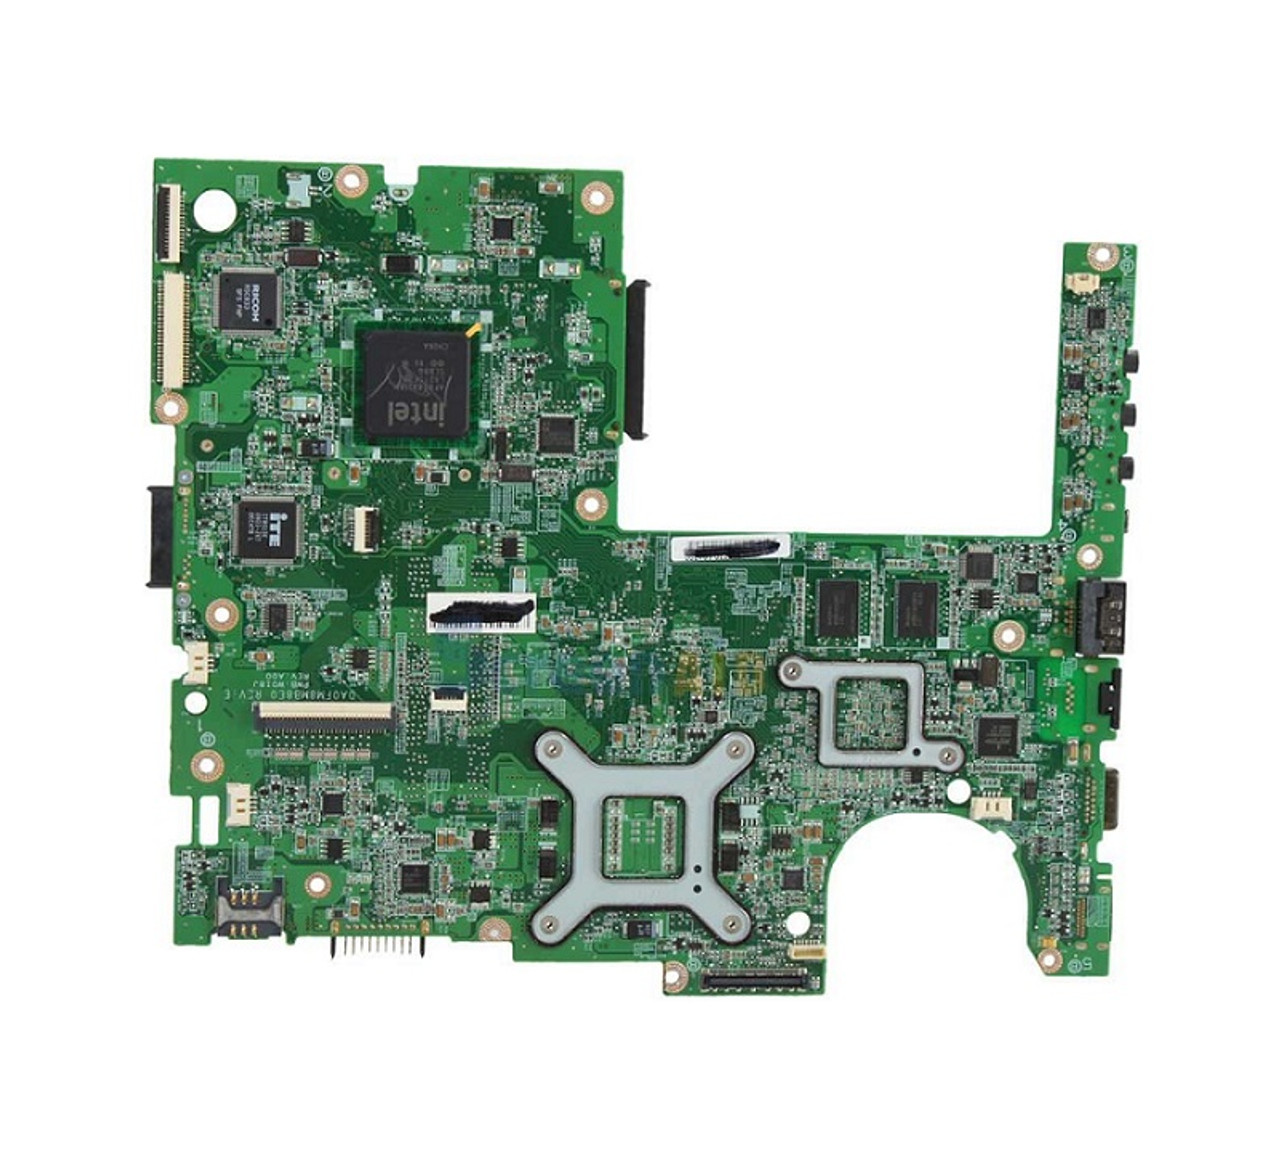 A000006540 - Toshiba System Board for Satellite P100 945GM Laptop (Refurbished)